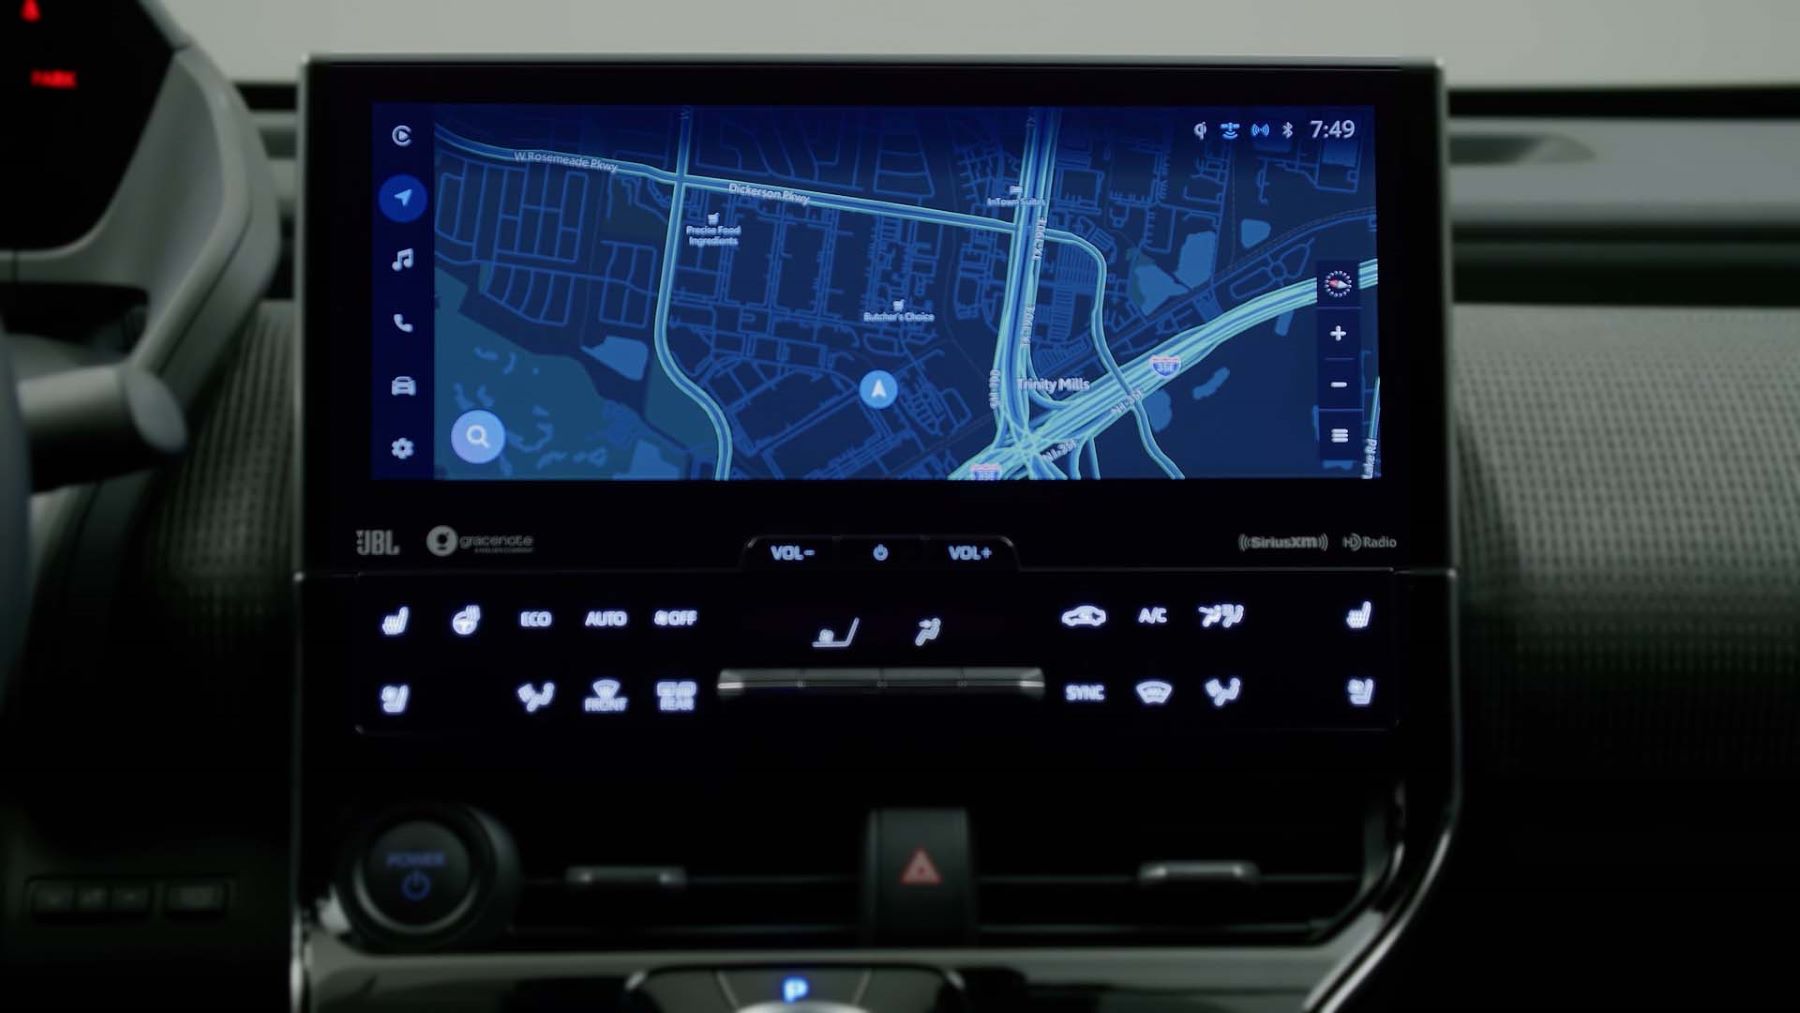 The infotainment and navigation system of a 2023 Toyota bZ4X Limited compact electric (EV) SUV model